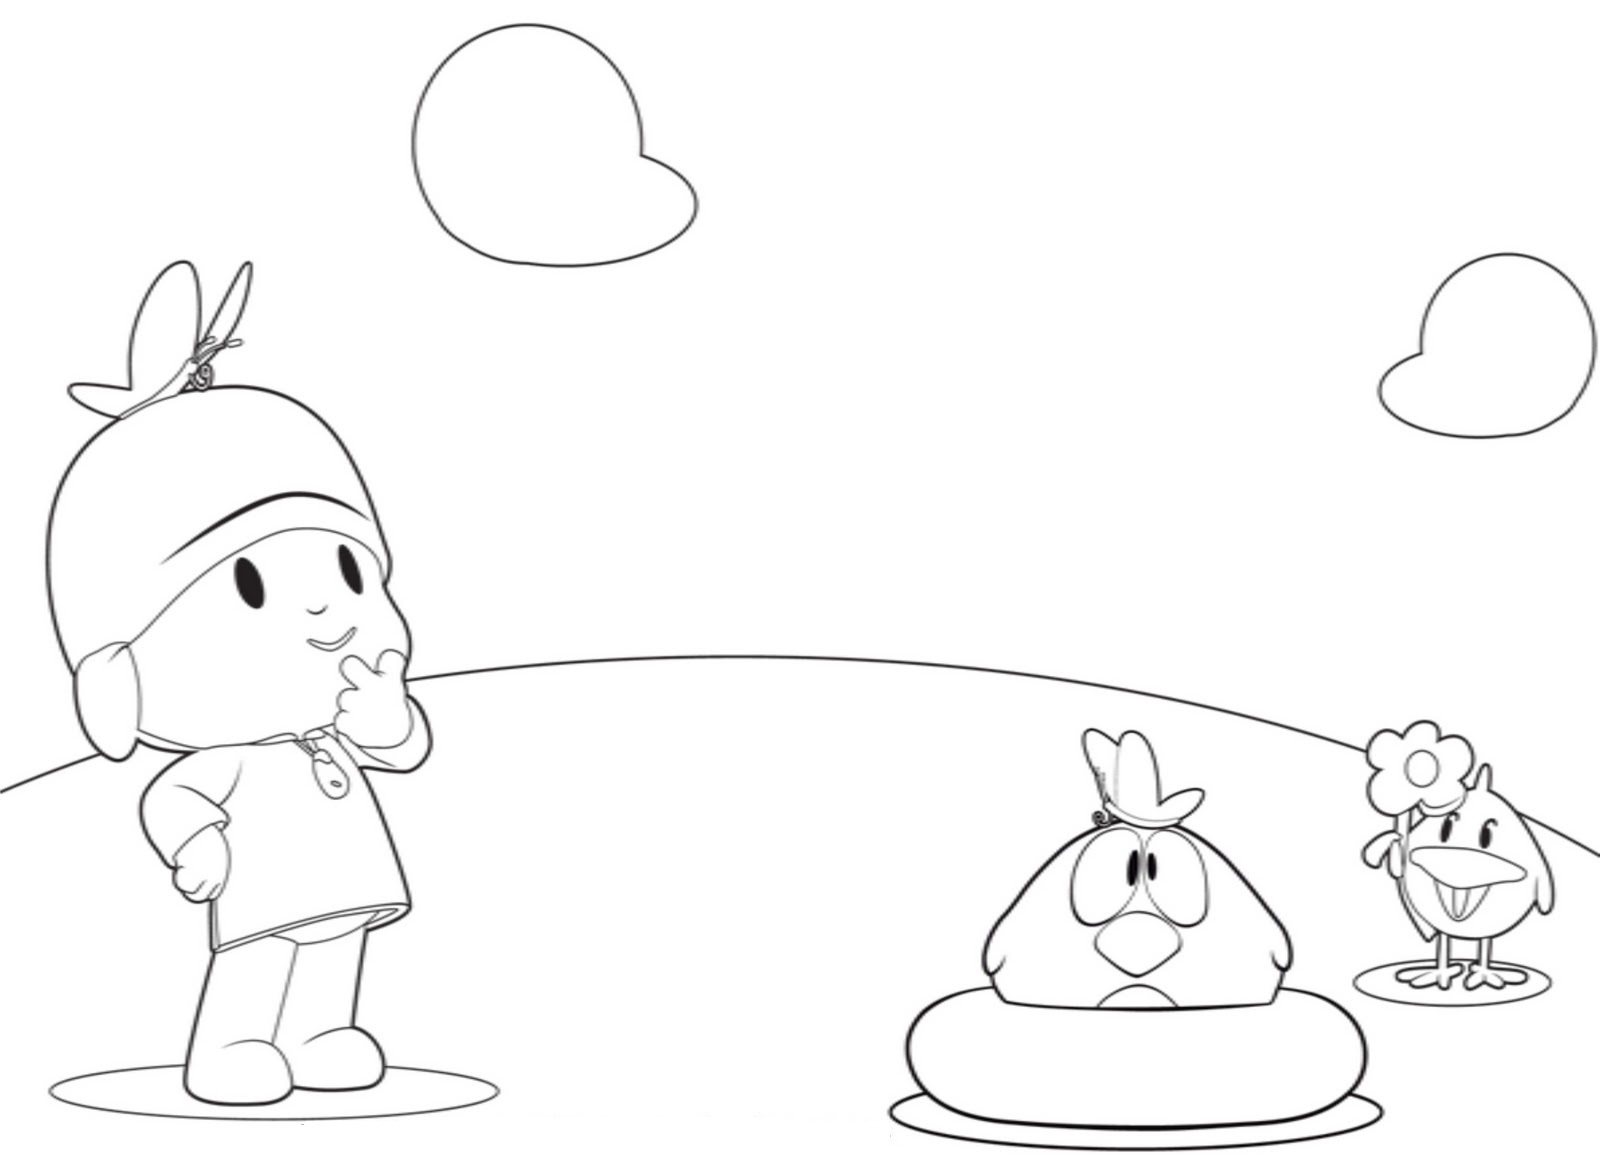 Free Printable Pocoyo Coloring Pages For Kids